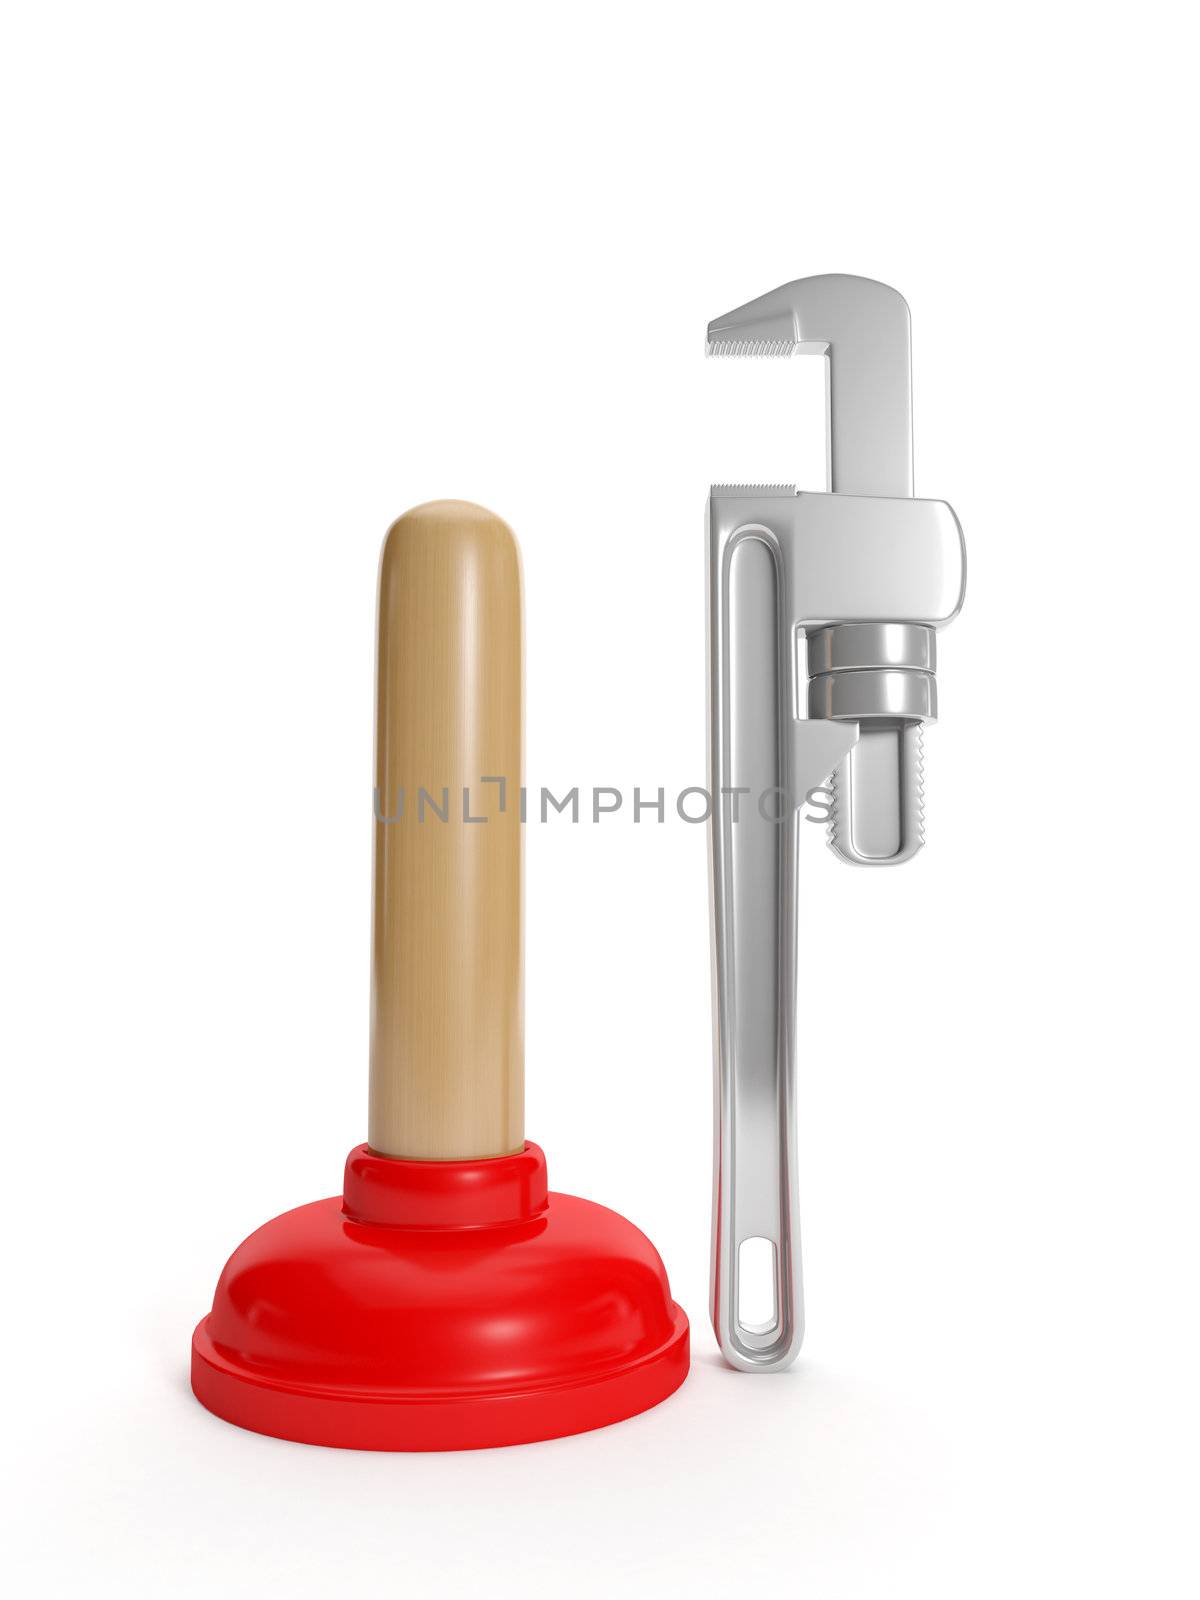 3D Illustration: plunger and a wrench on a white background by kolobsek